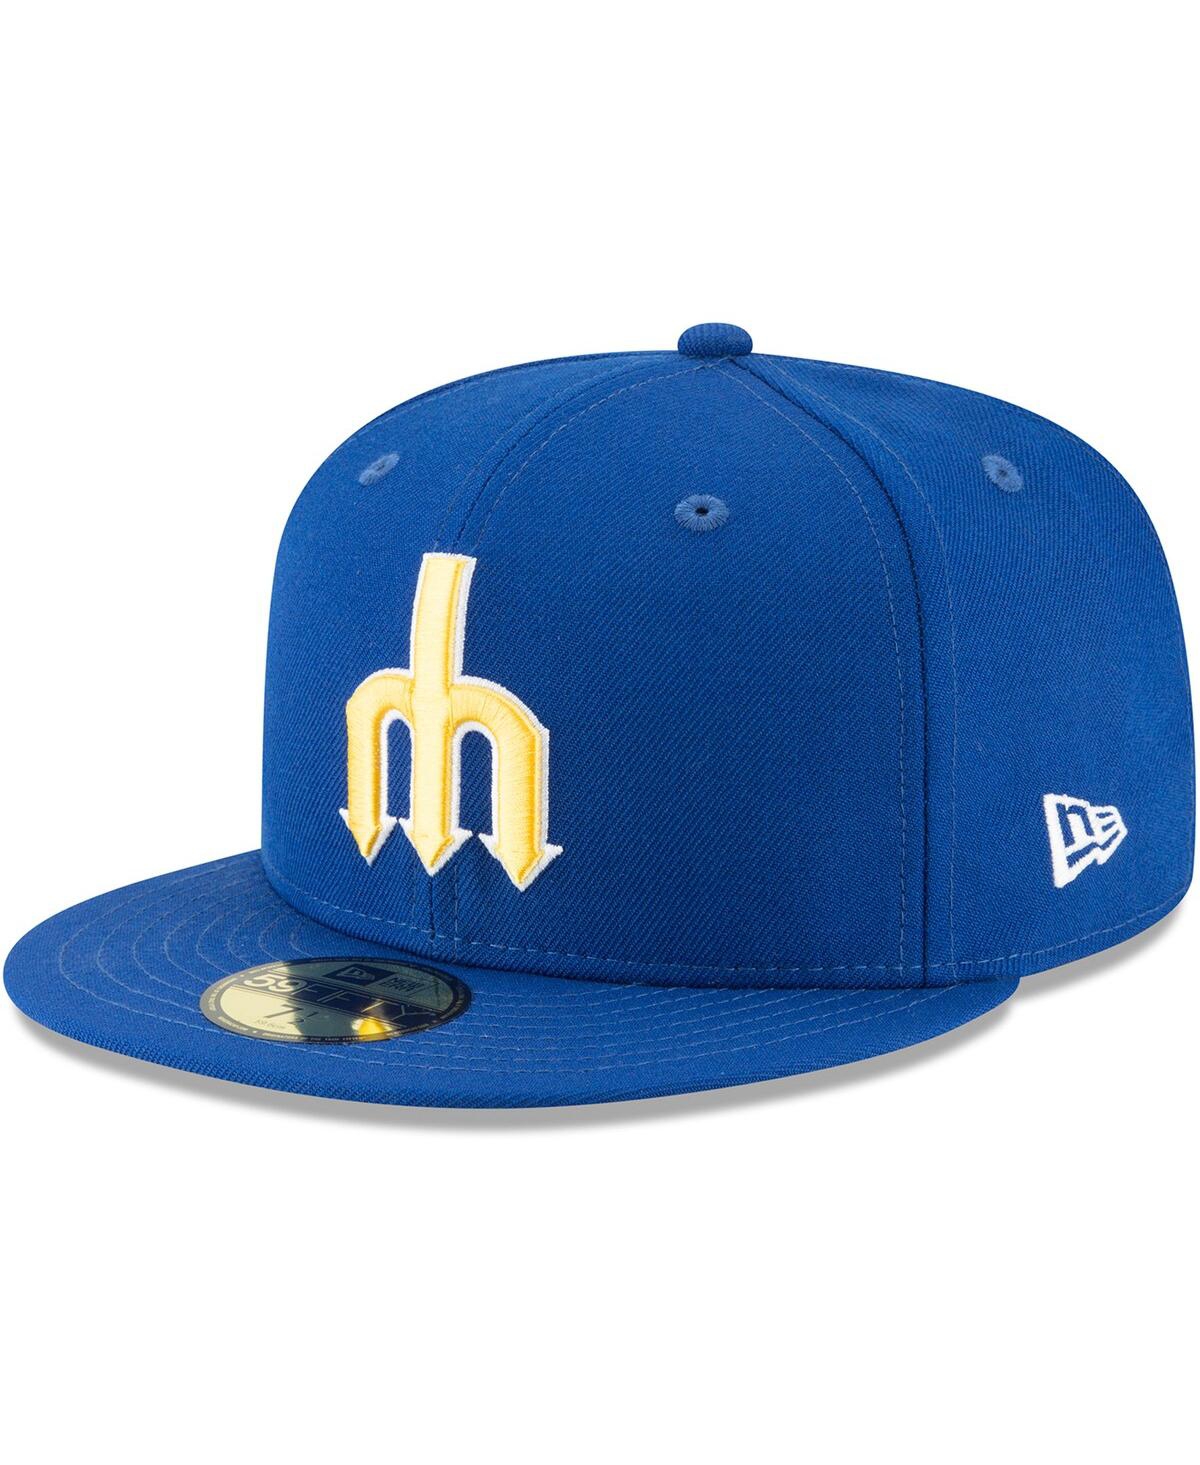 NEW ERA MEN'S NEW ERA BLUE SEATTLE MARINERS COOPERSTOWN COLLECTION WOOL 59FIFTY FITTED HAT